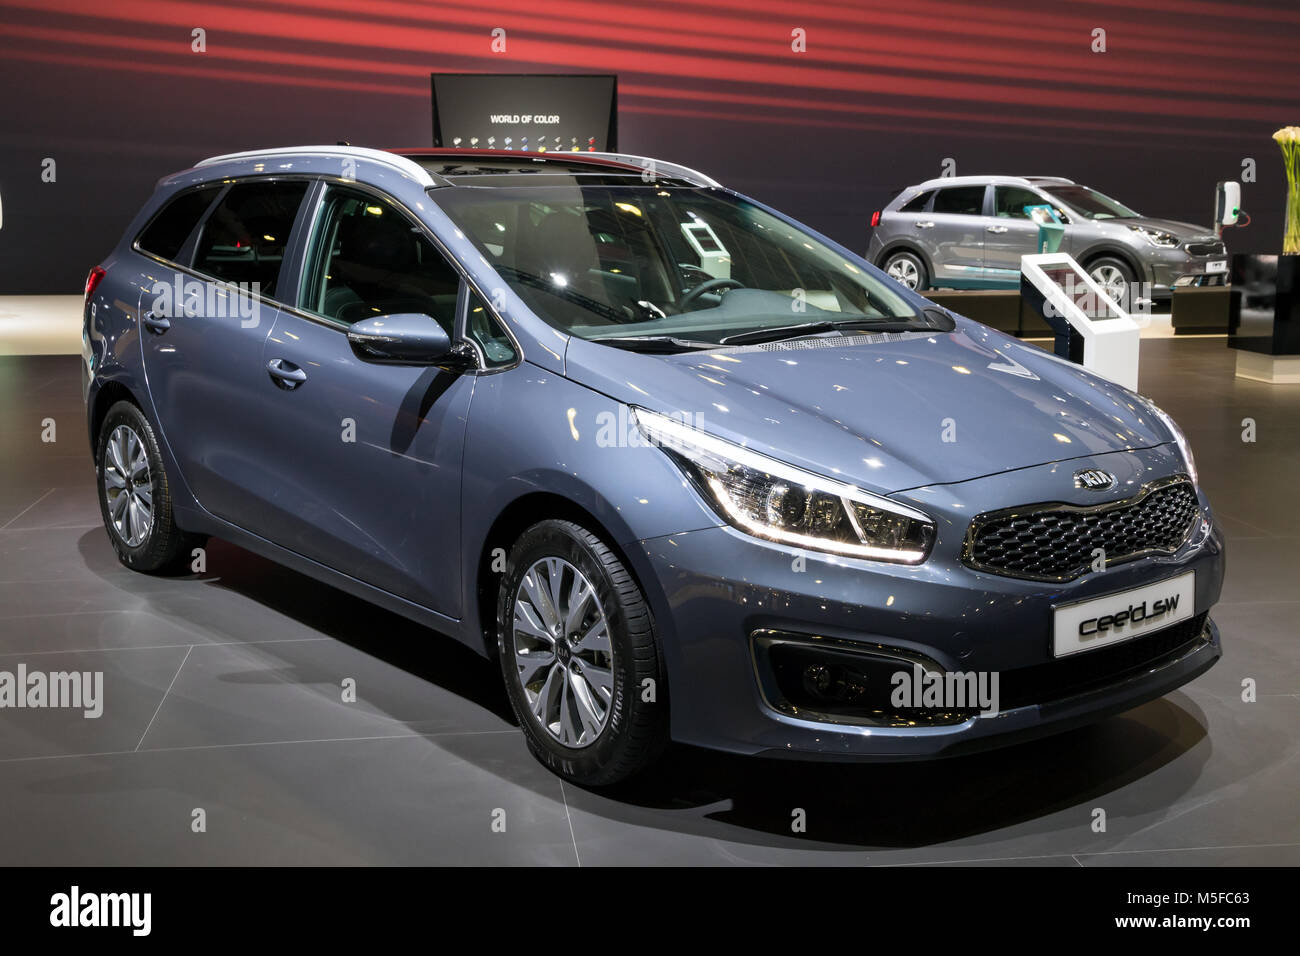 BRUSSELS - JAN 10, 2018: Kia Cee'd SW car shown at the Brussels Motor Show. Stock Photo